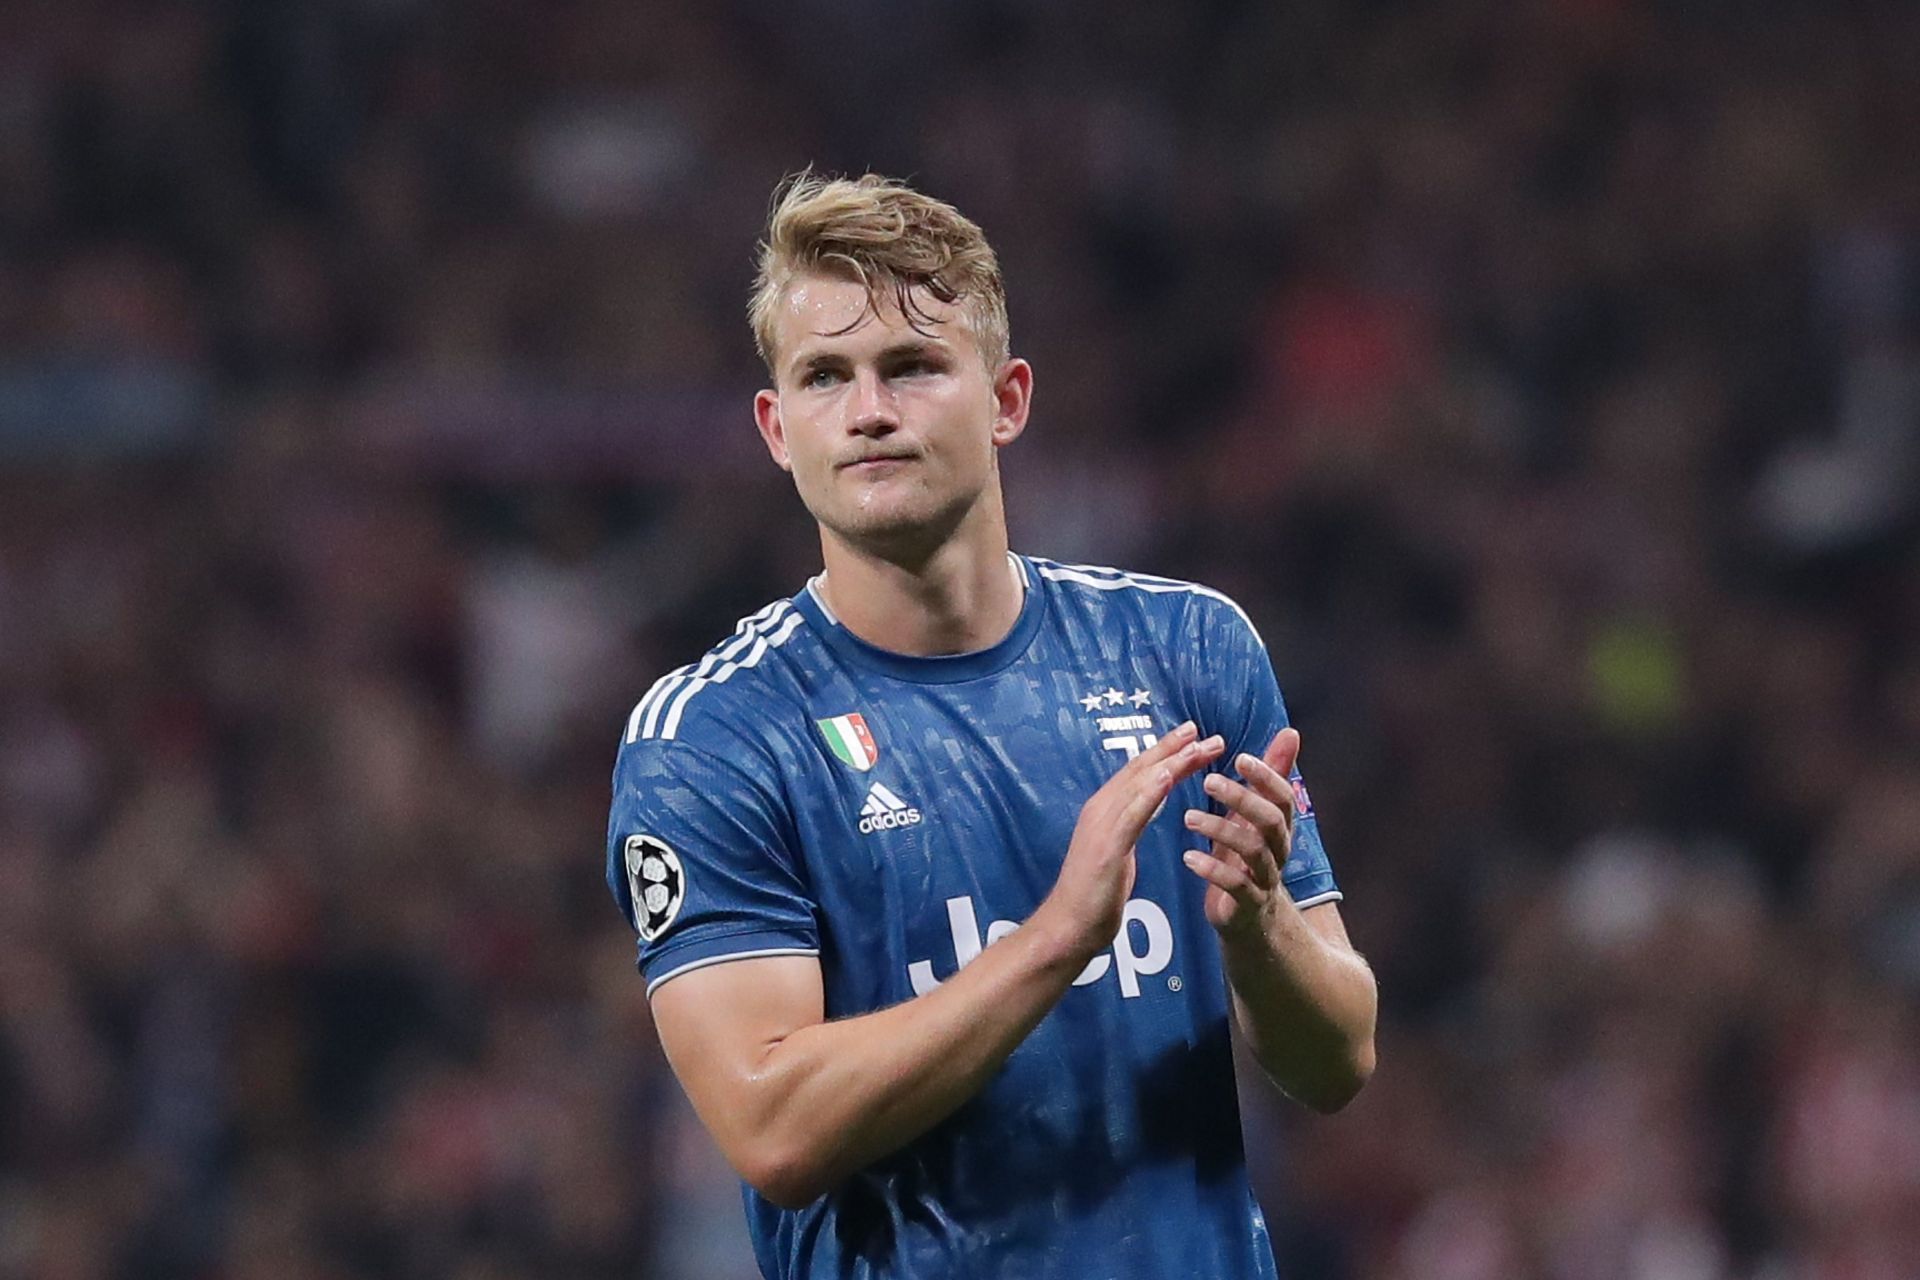 De Ligt is one of the best young defenders in the world